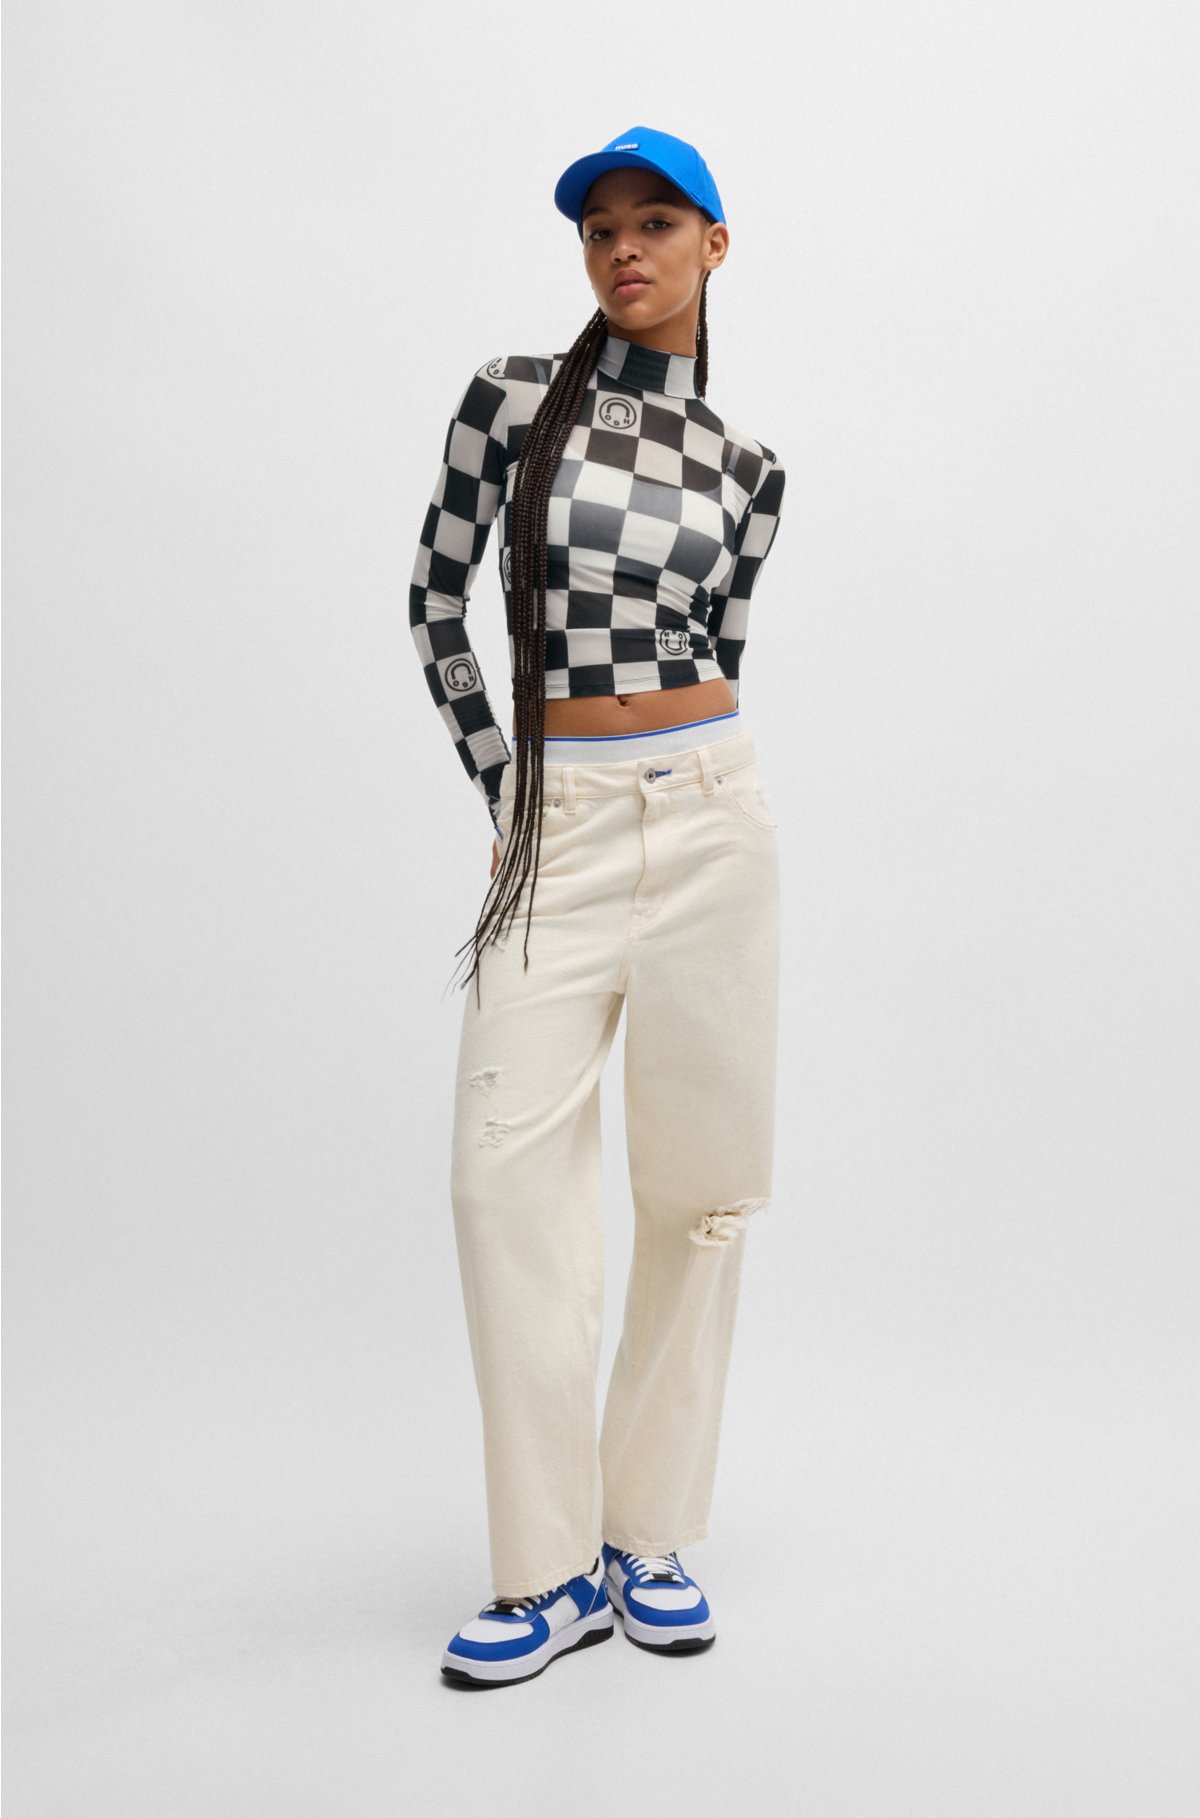 Cropped long-sleeved top in printed stretch mesh, Black Patterned